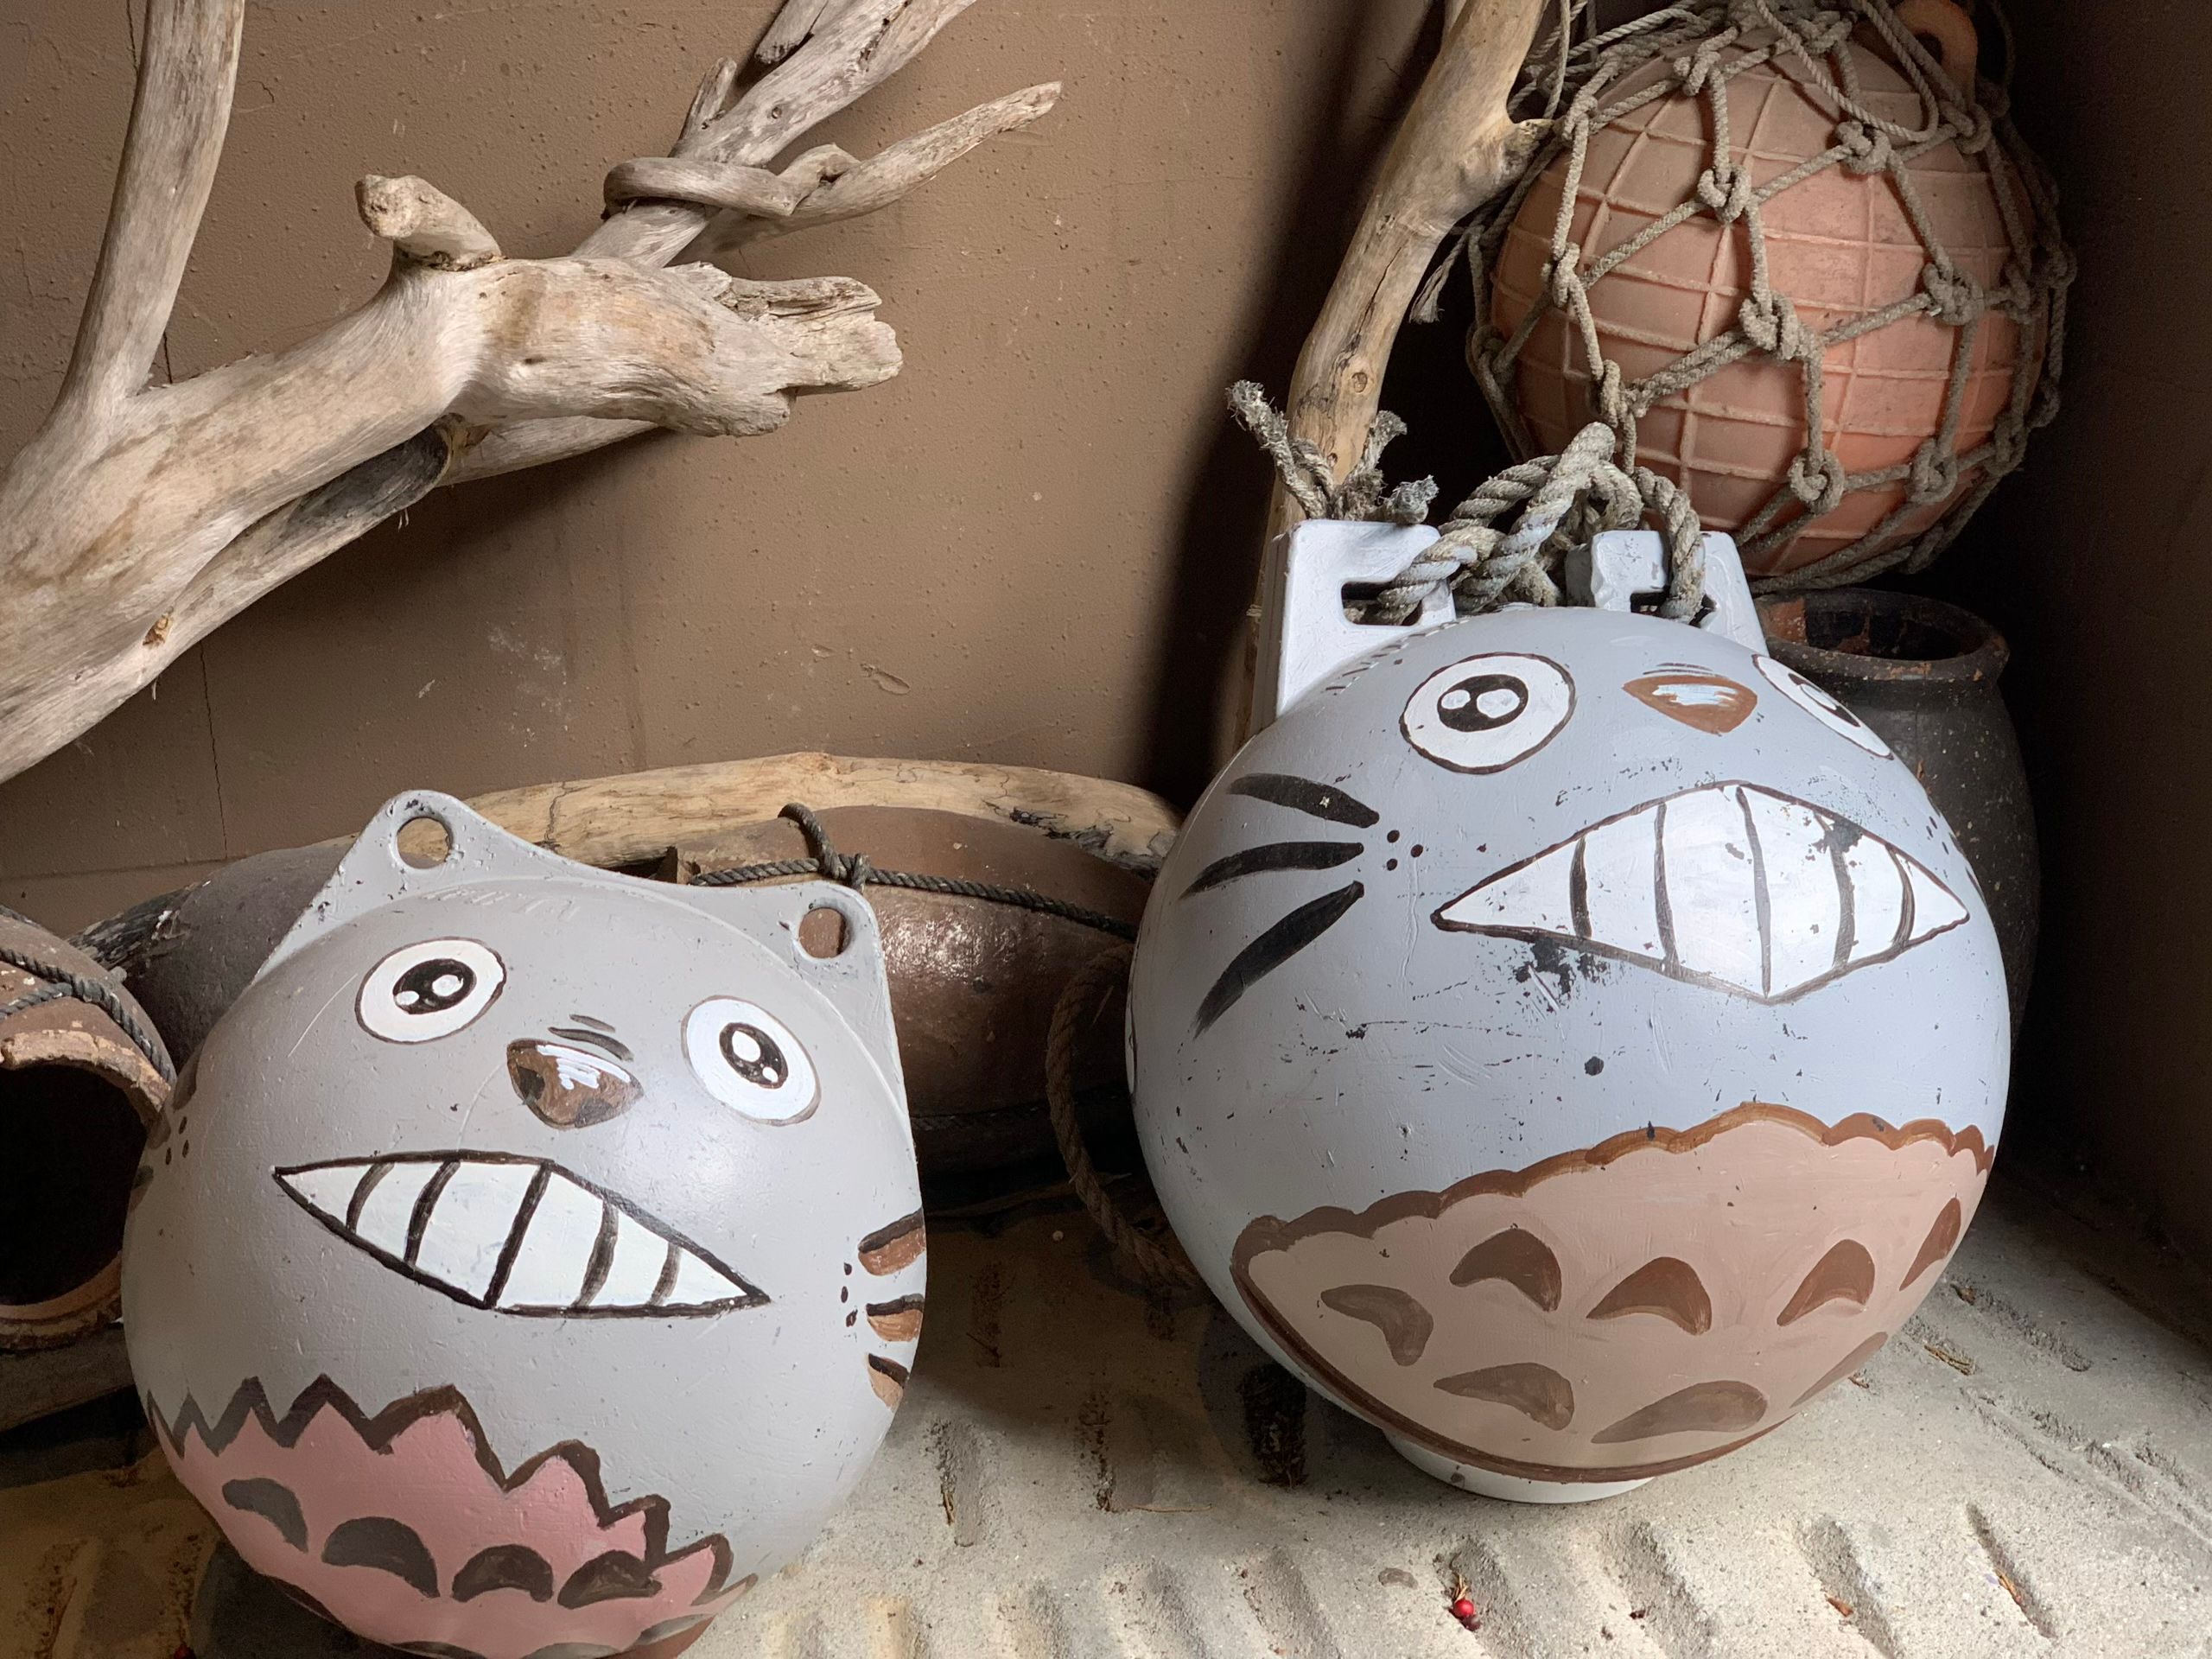 Two fishing buoys painted to resemble totoros.